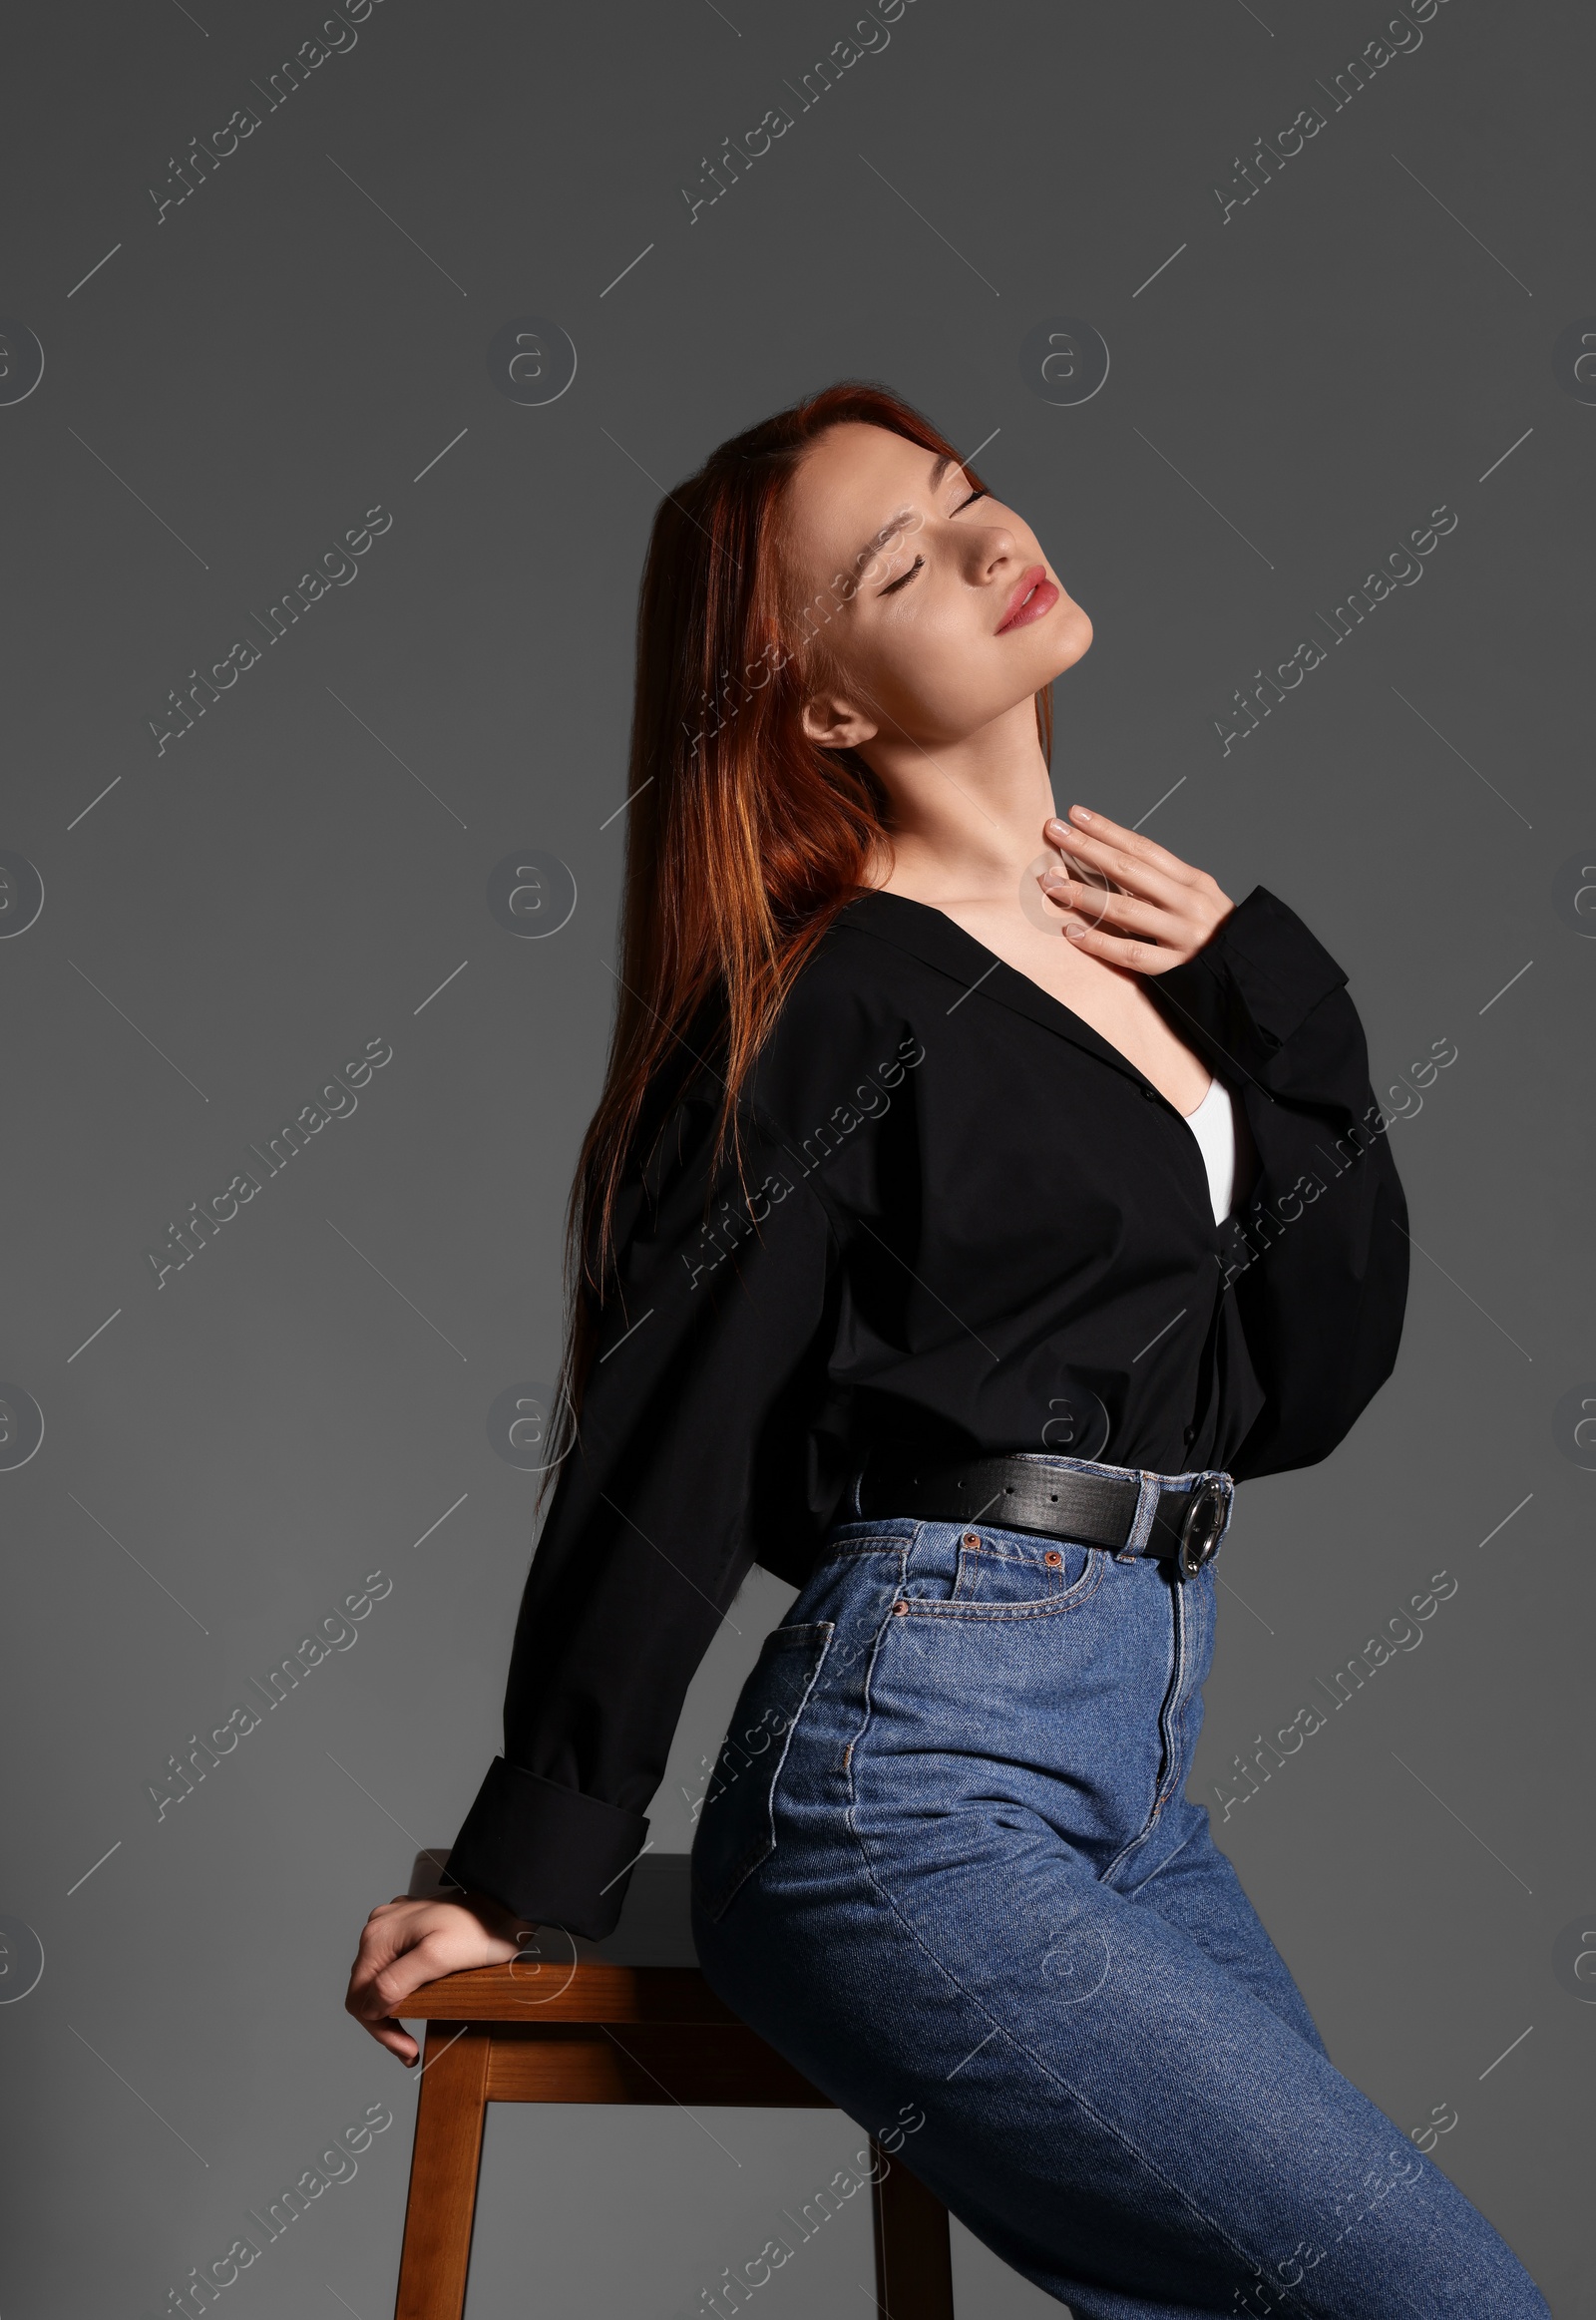 Photo of Beautiful young woman sitting on stool against gray background